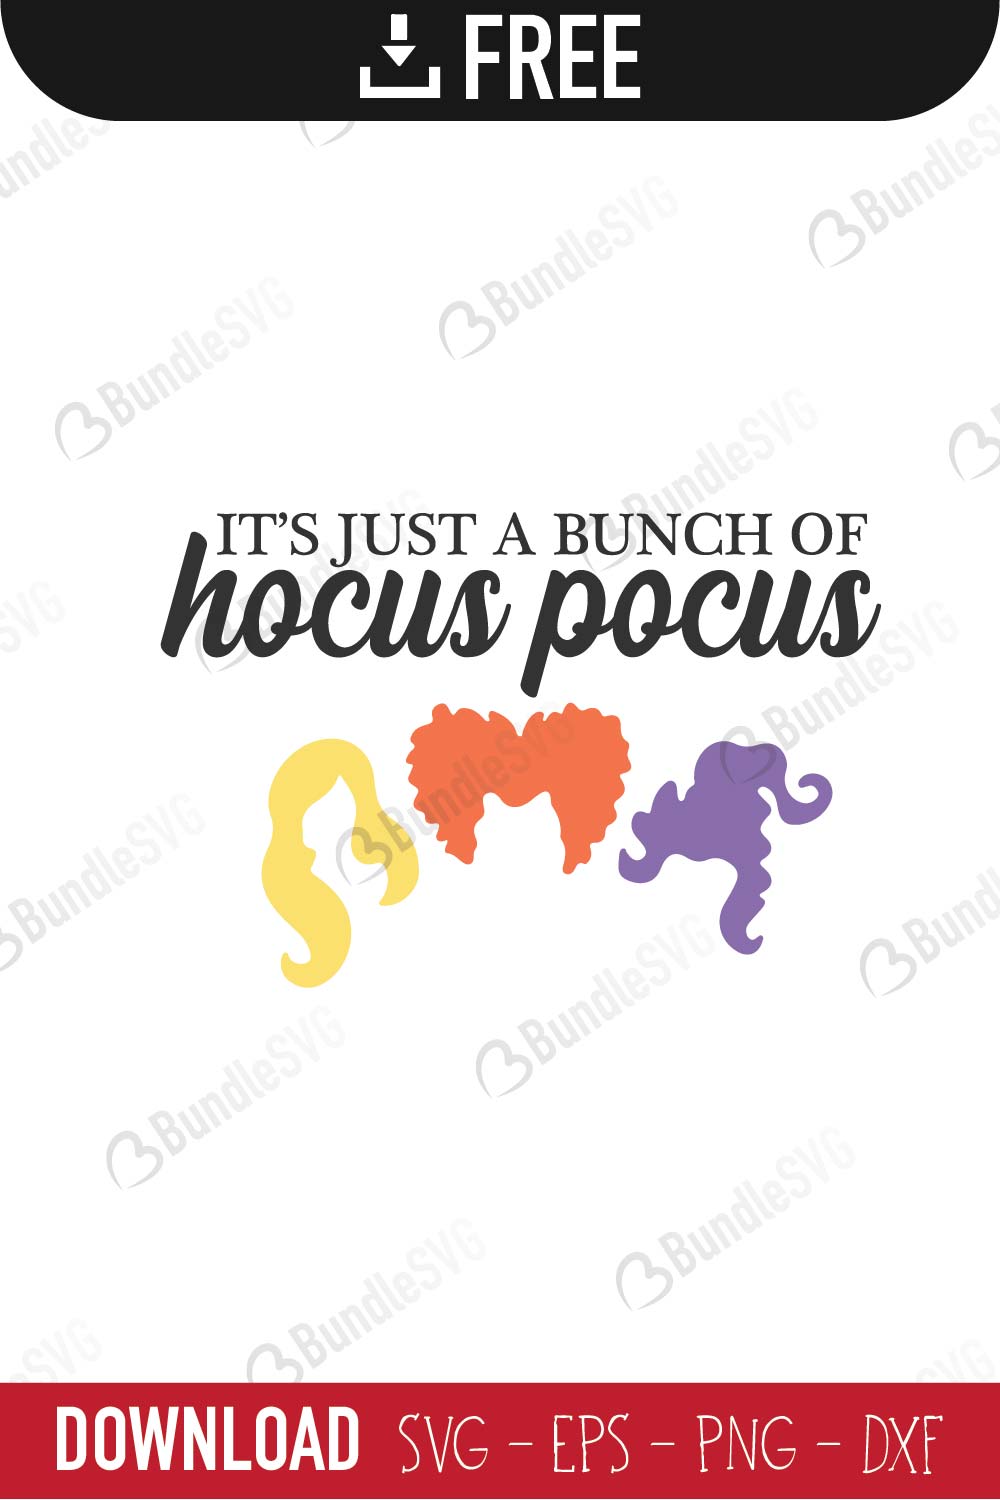 Download Hocus Pocus Silhouette Svg Free Free Svg Cut Files Create Your Diy Projects Using Your Cricut Explore Silhouette And More The Free Cut Files Include Svg Dxf Eps And Png Files SVG Cut Files